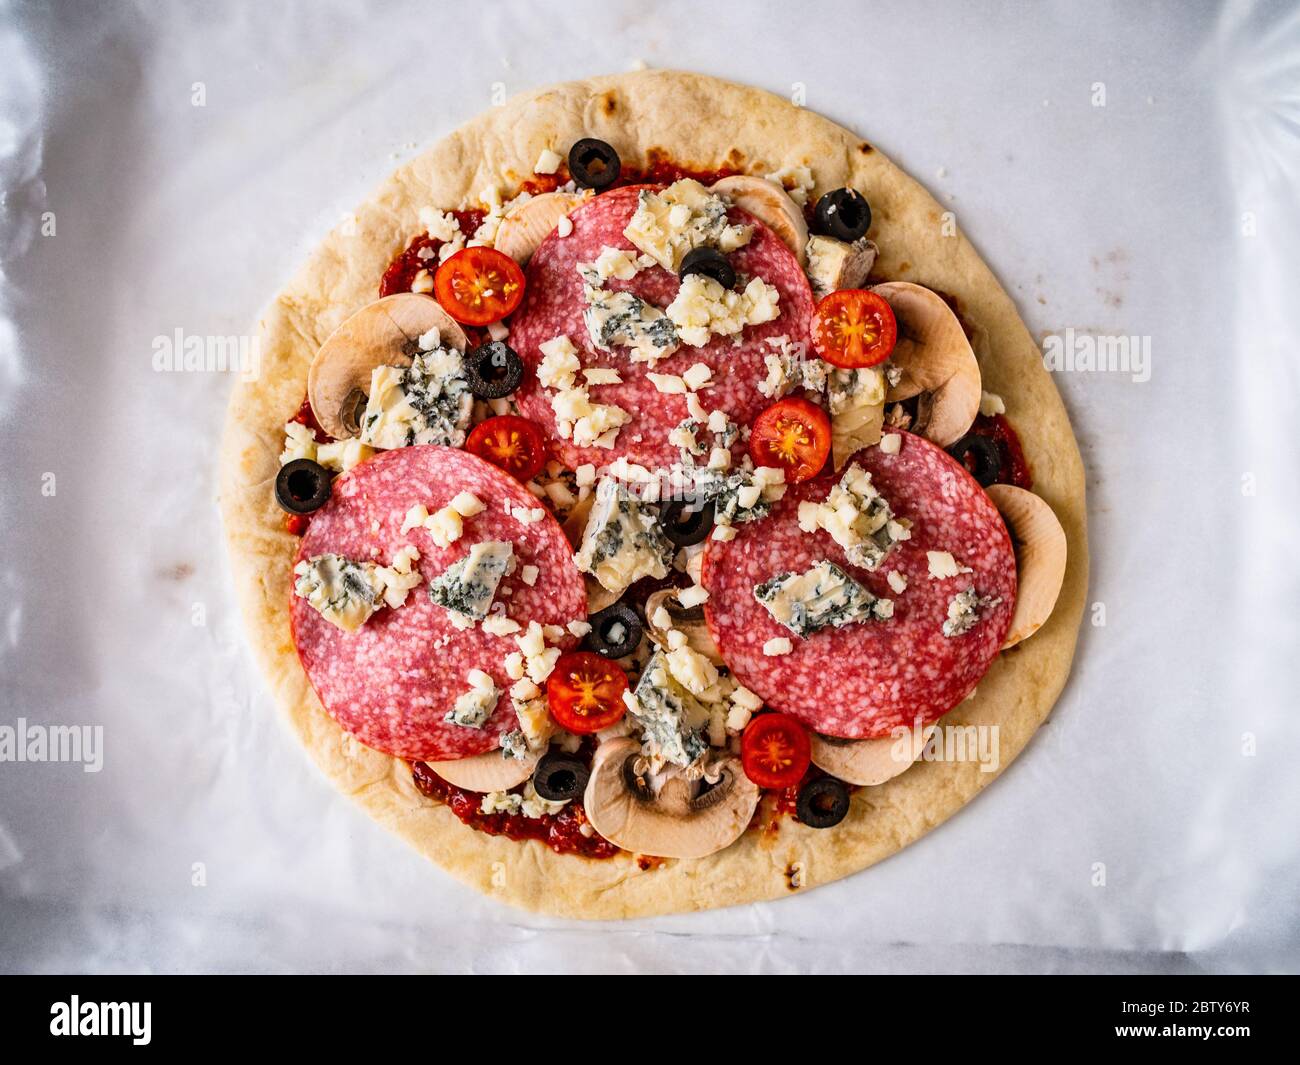 Unbaked pizza with salami, champignon,olives and cherry tomatoes Stock Photo